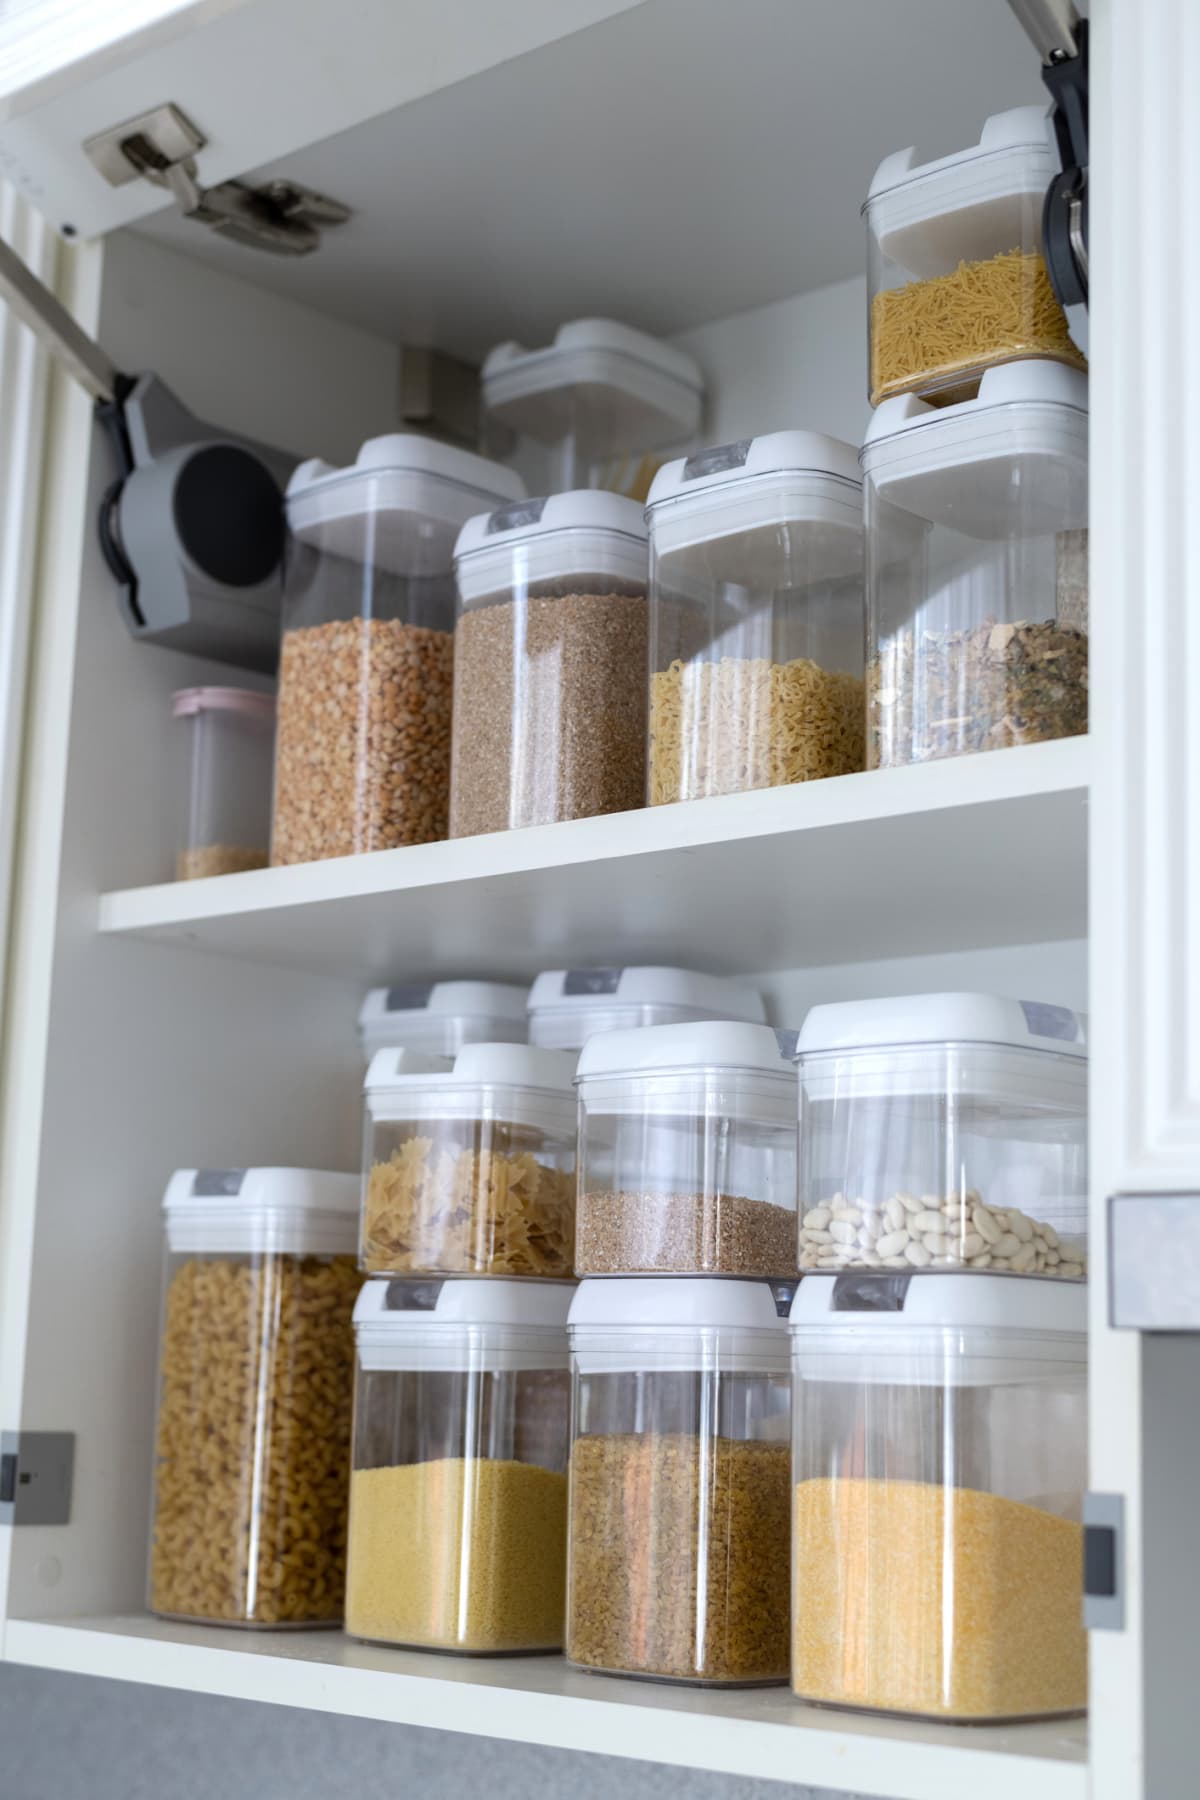 Food storage containers filled with cereals in the kitchen pantry